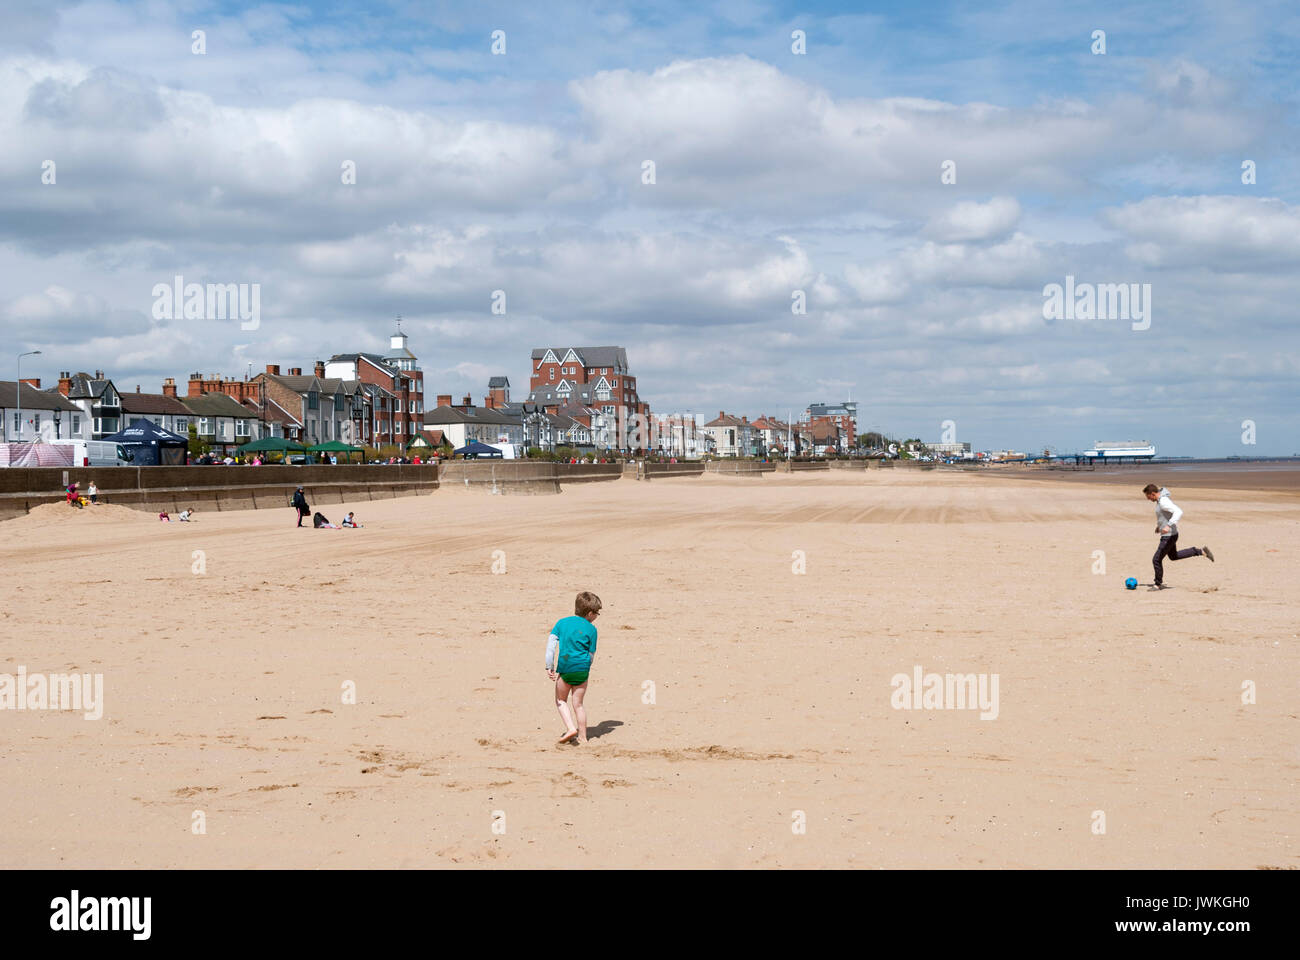 Family Playing Football on the Beach, Tide Out, English Coastal Resort, Summertime, Seaside Town, Cleethorpes, Sand, Family Outing, Seaside Pier Stock Photo